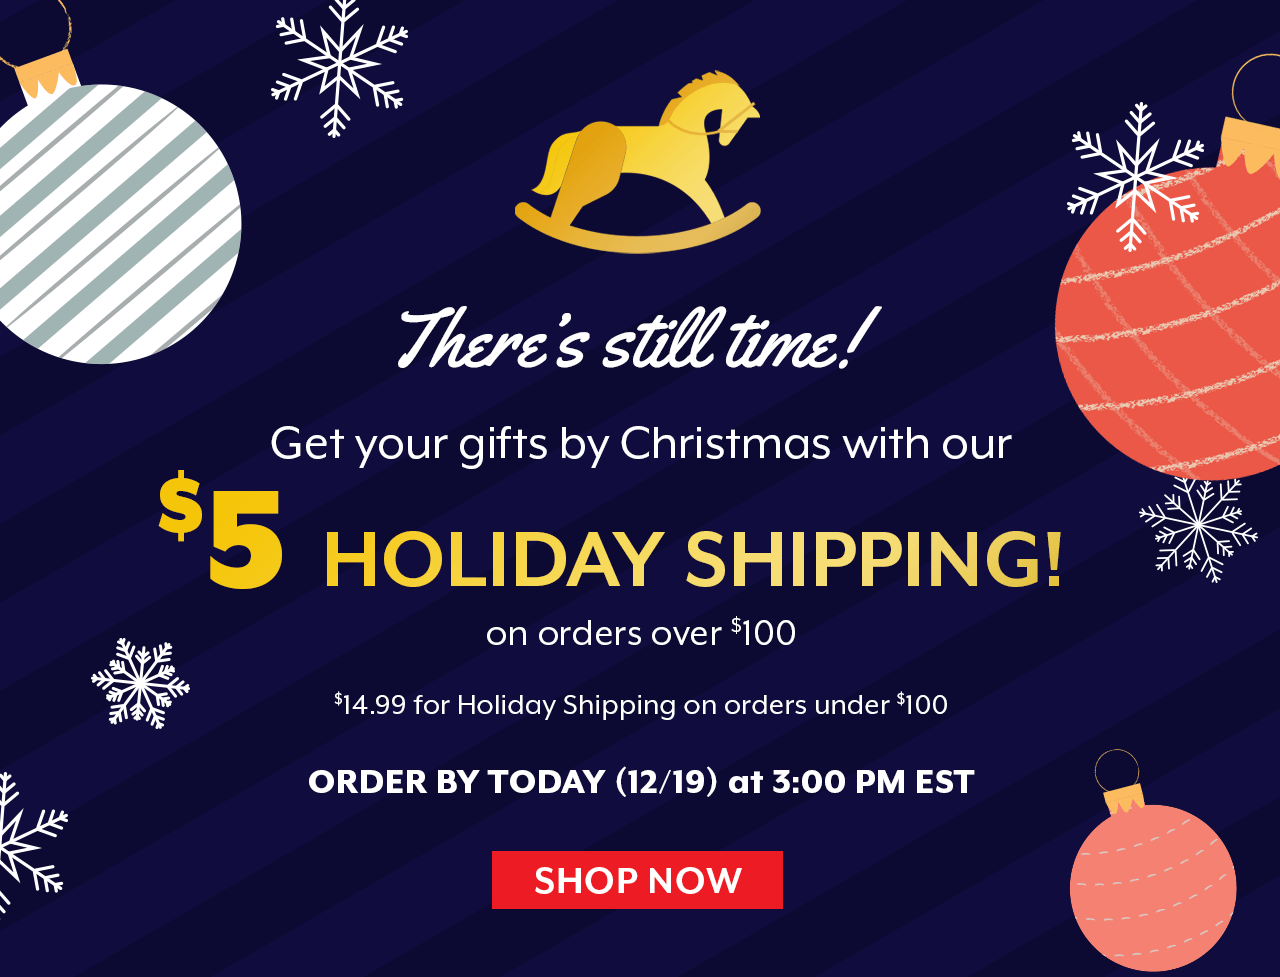 Order by 3:00 PM EST today to get $5 holiday shipping guaranteed for delivery by Christmas.